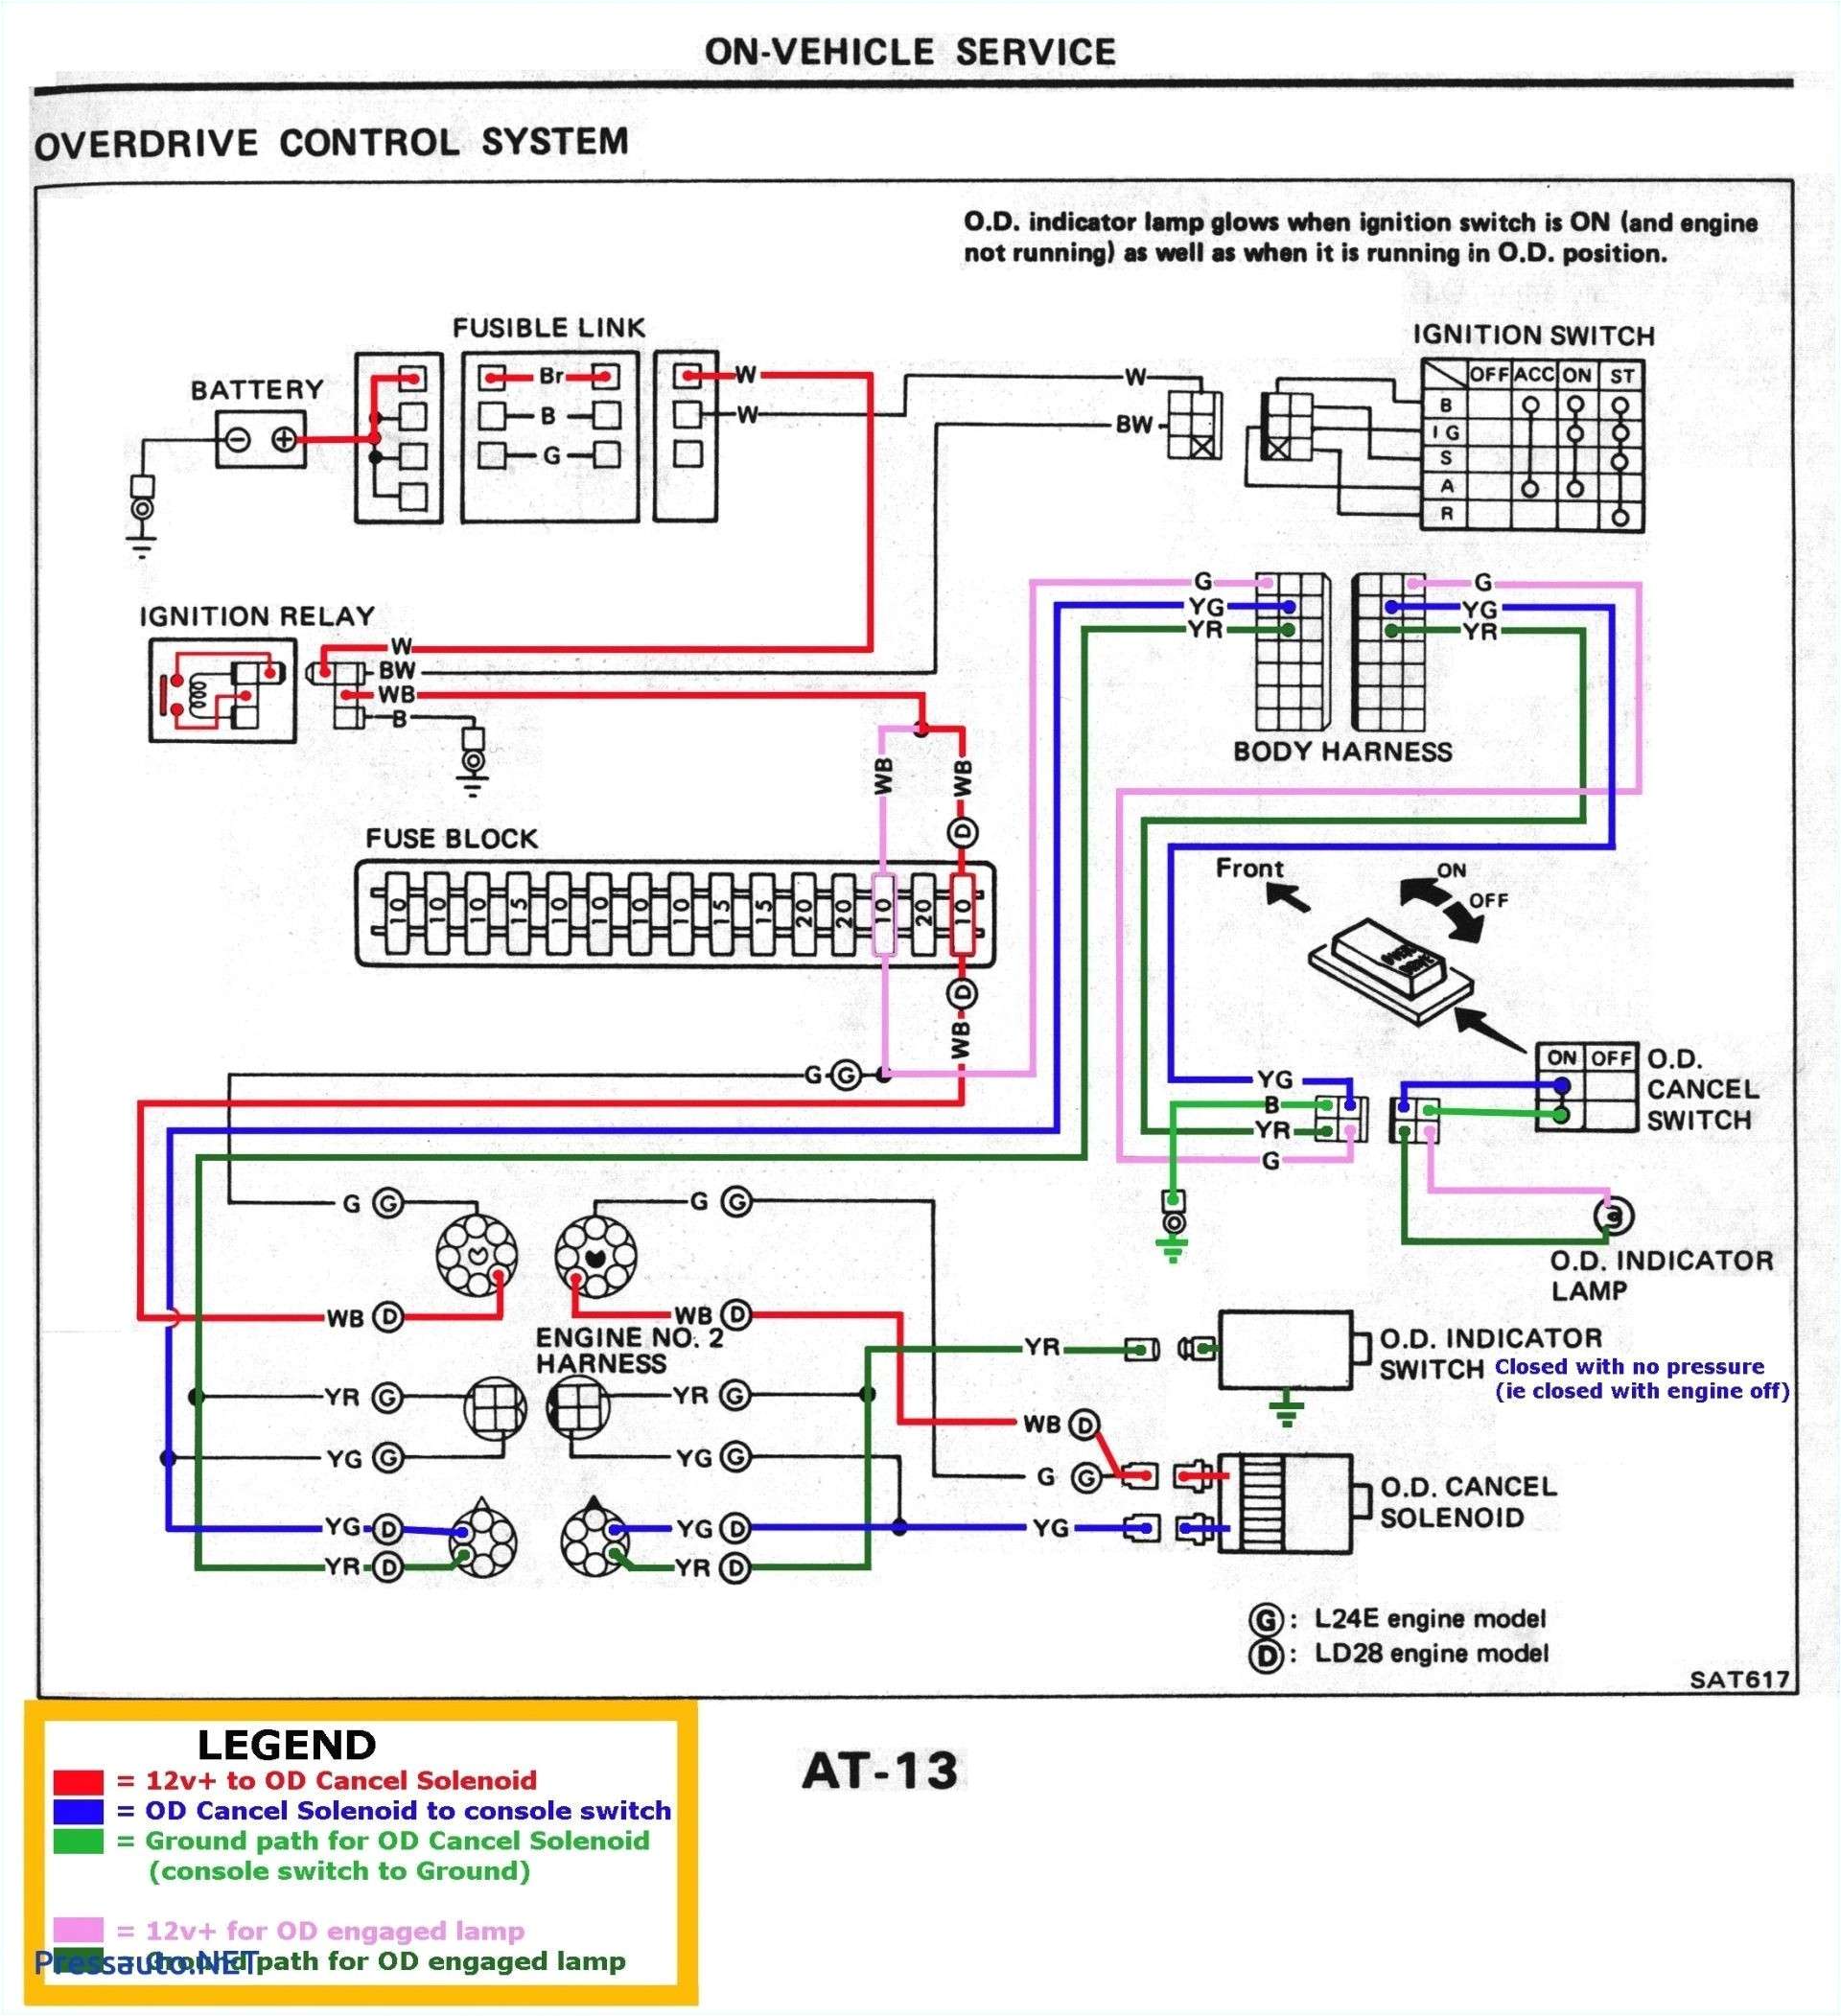 ats control wiring diagram best of automatic changeover switch wiring diagram